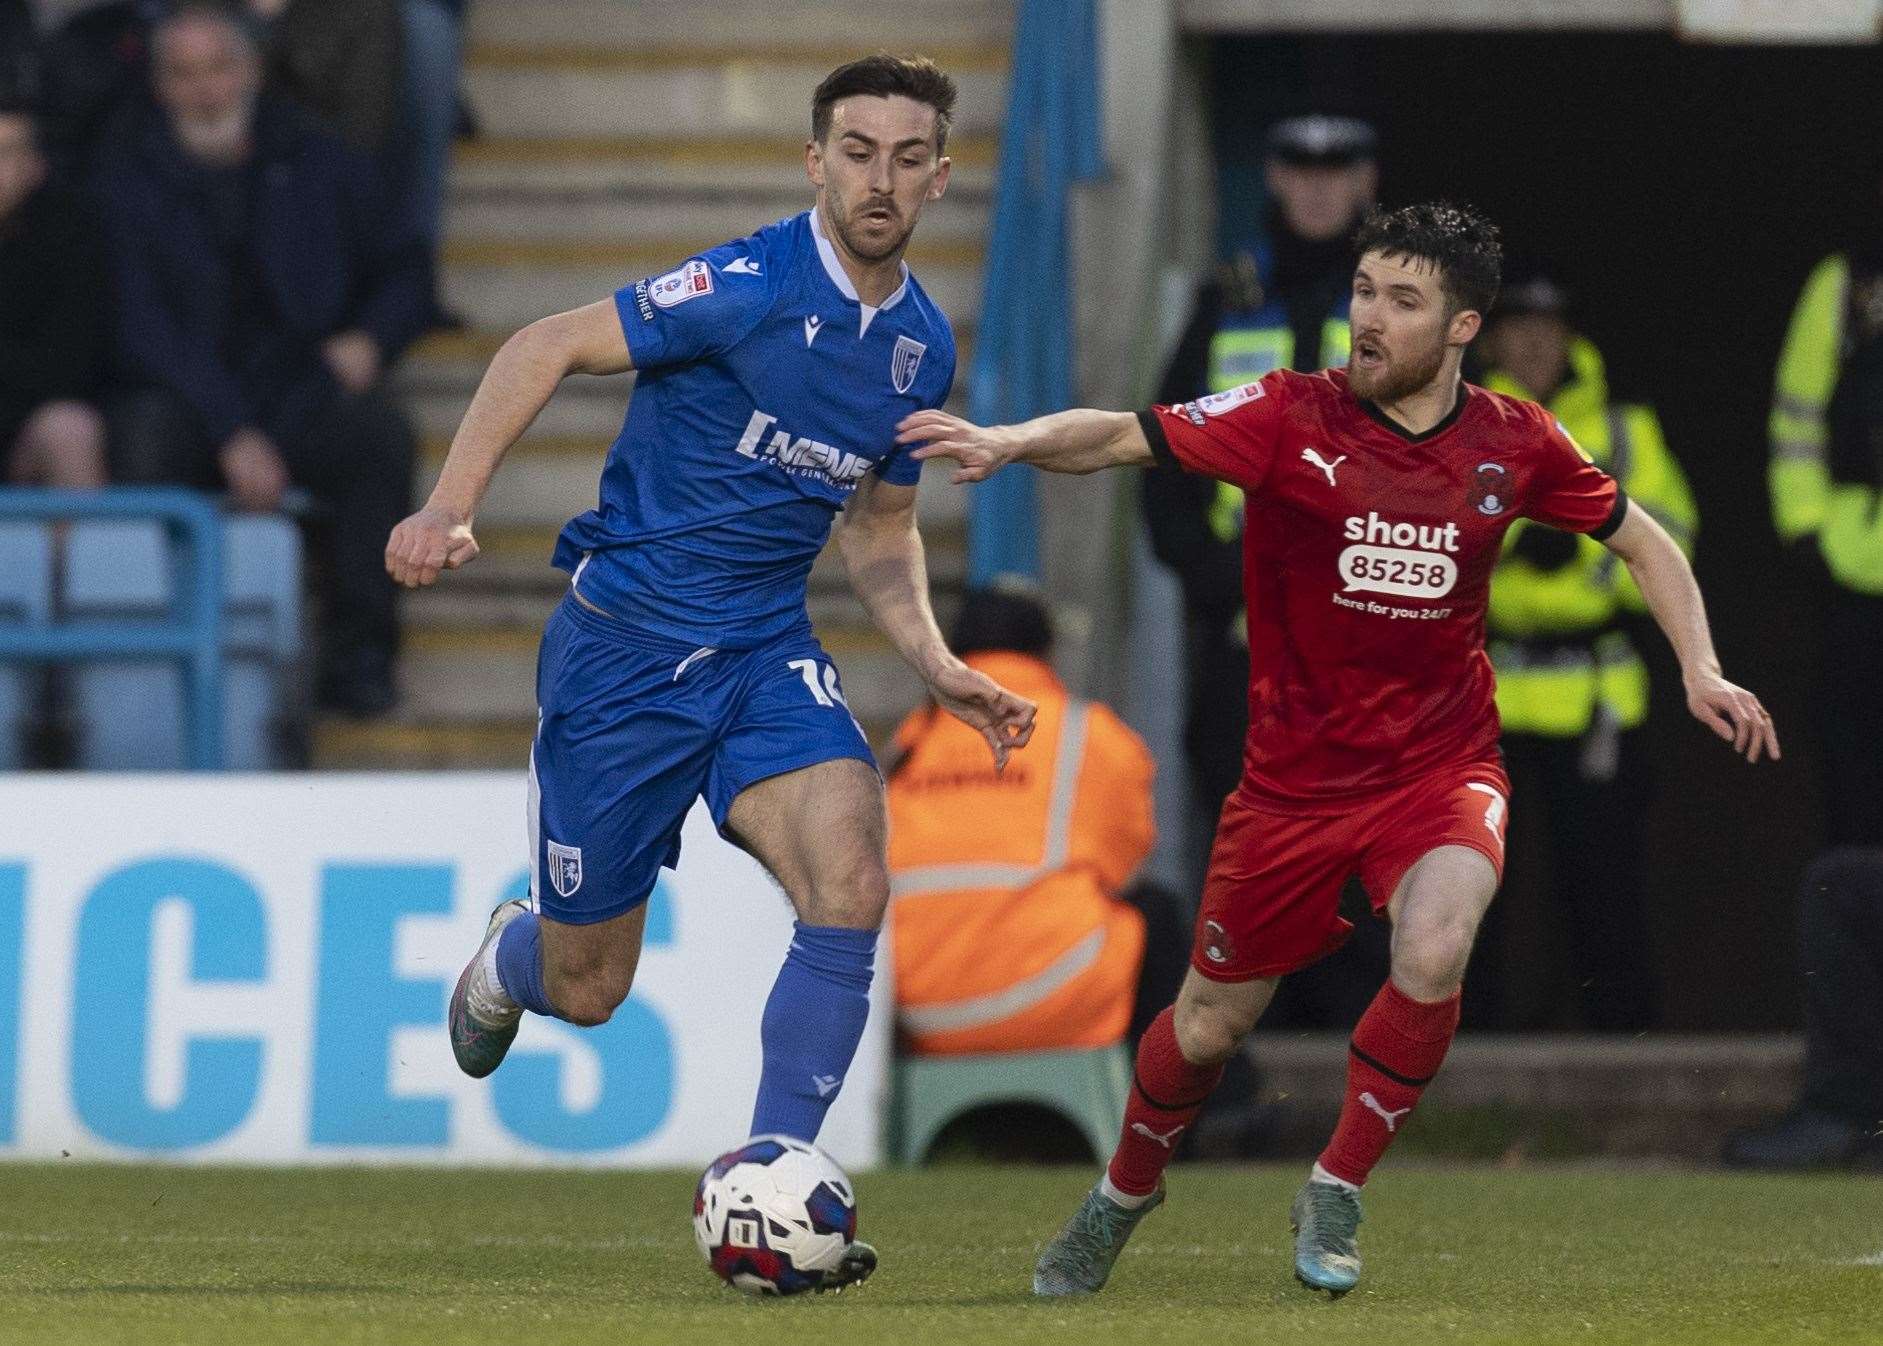 Robbie McKenzie in action for Gillingham on Tuesday night